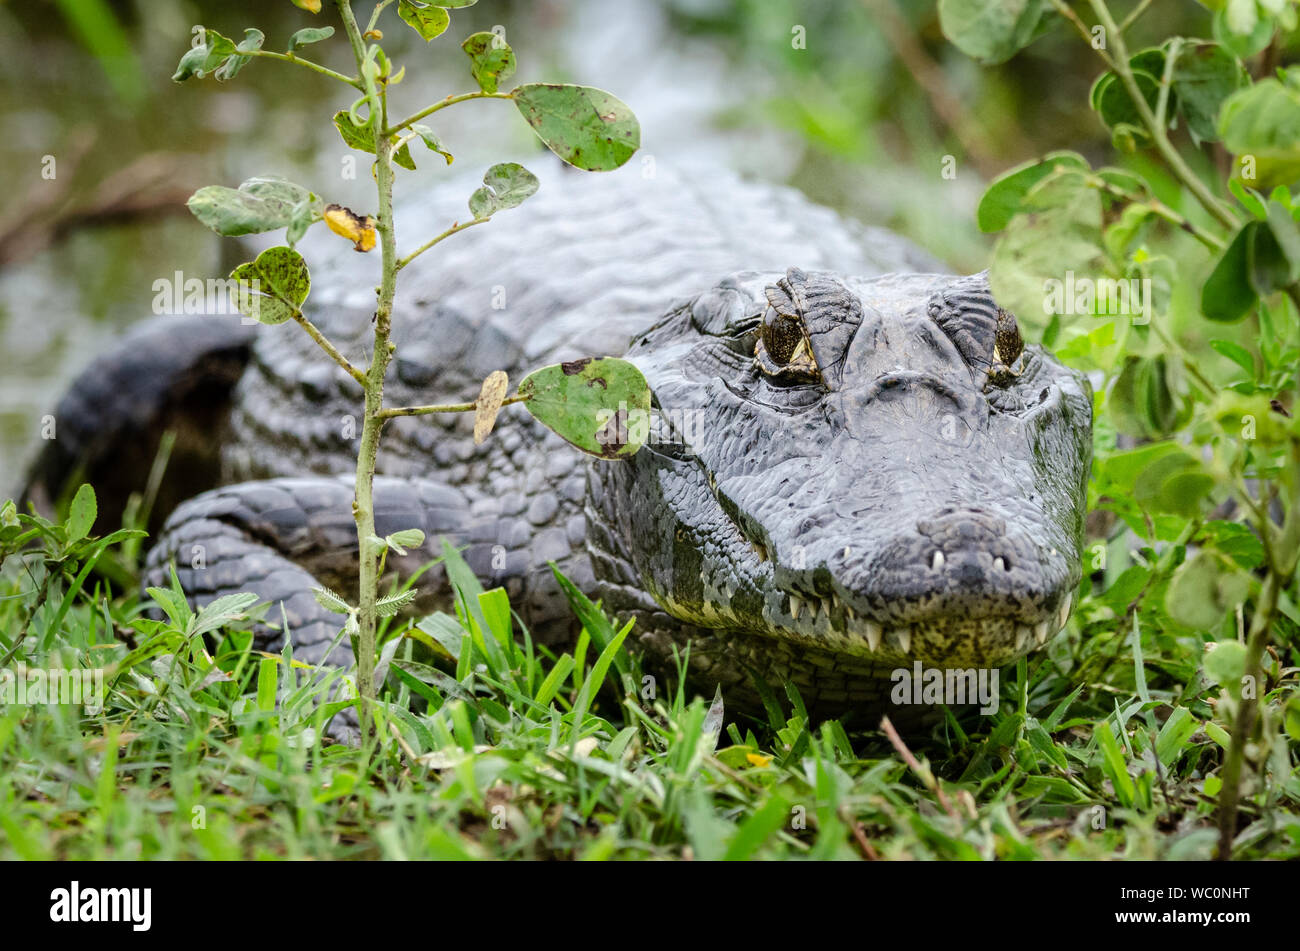 A caiman laying down in the grass and looking forward Stock Photo